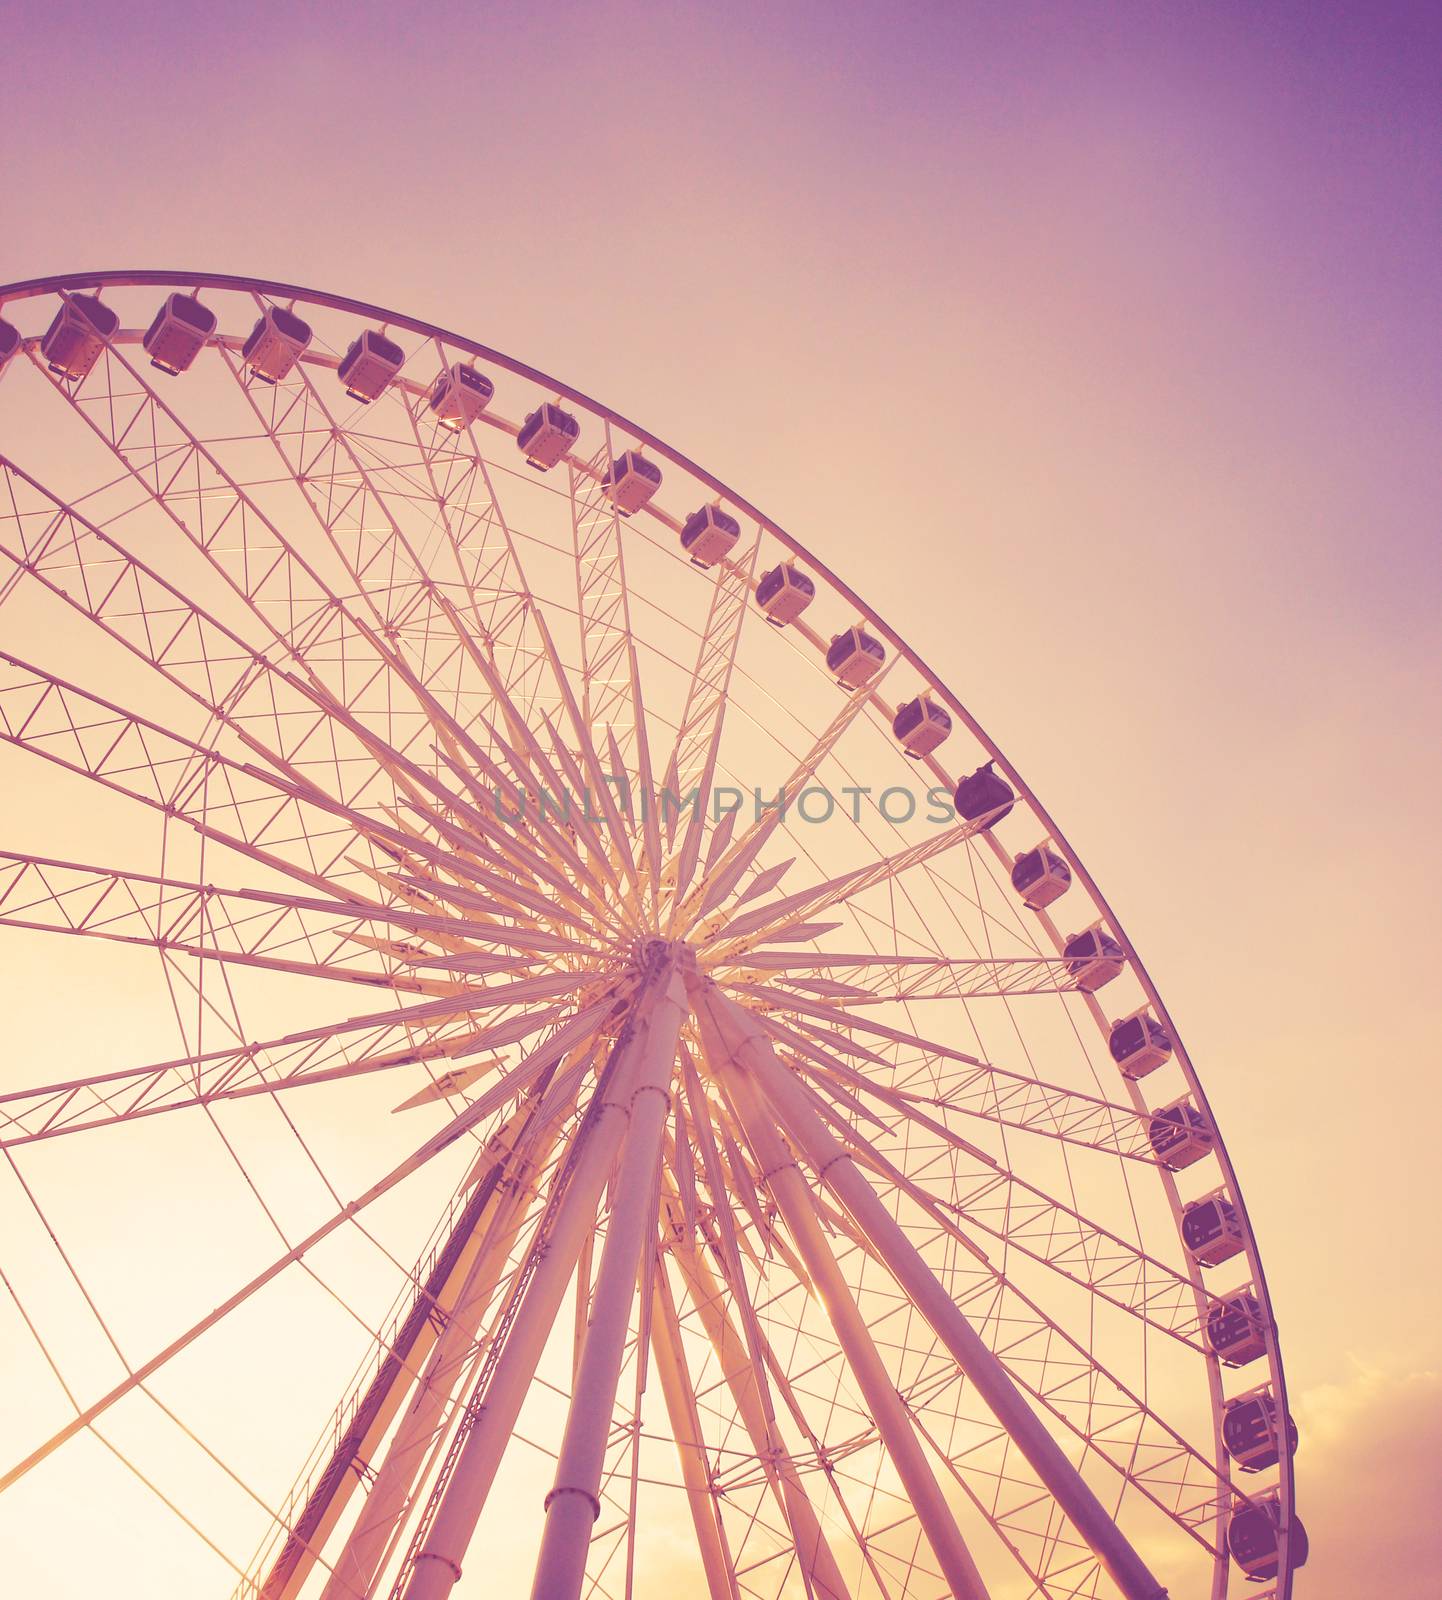 Ferris wheel with blue sky with retro effect by nuchylee